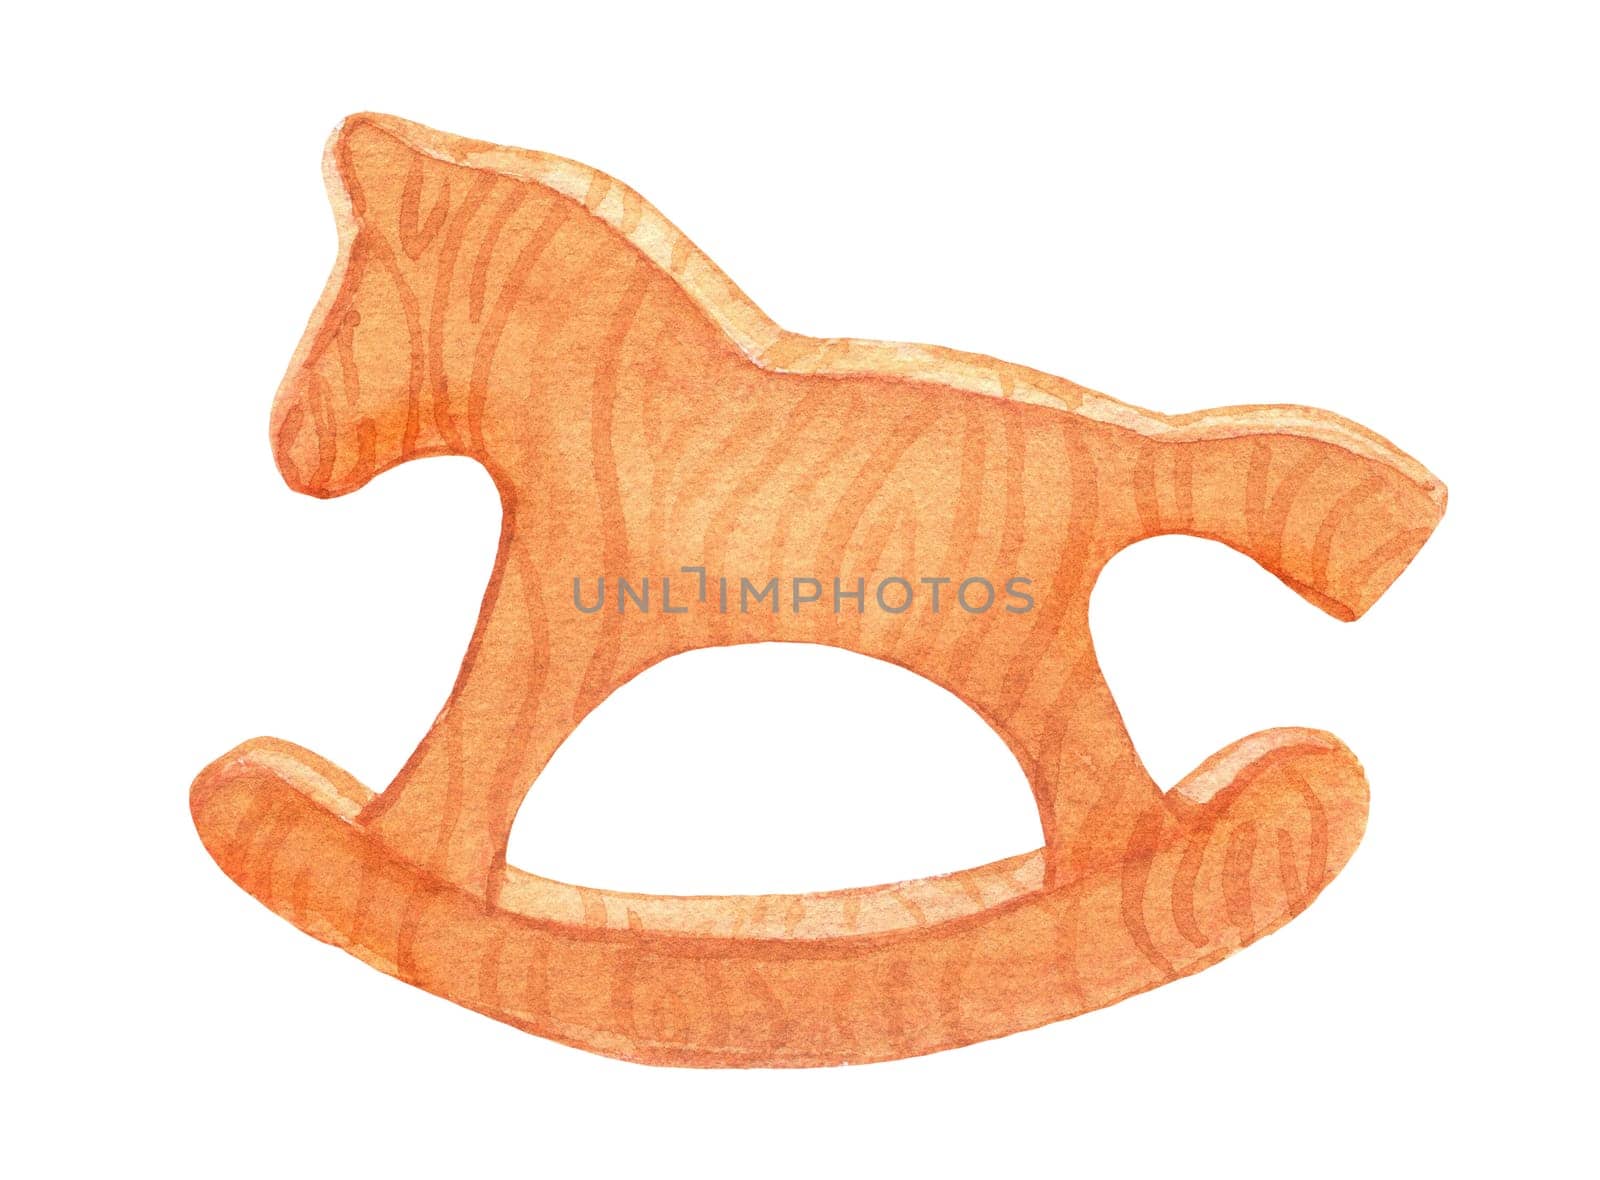 Wooden horse toy. Watercolor hand drawn illustration isolated on white.